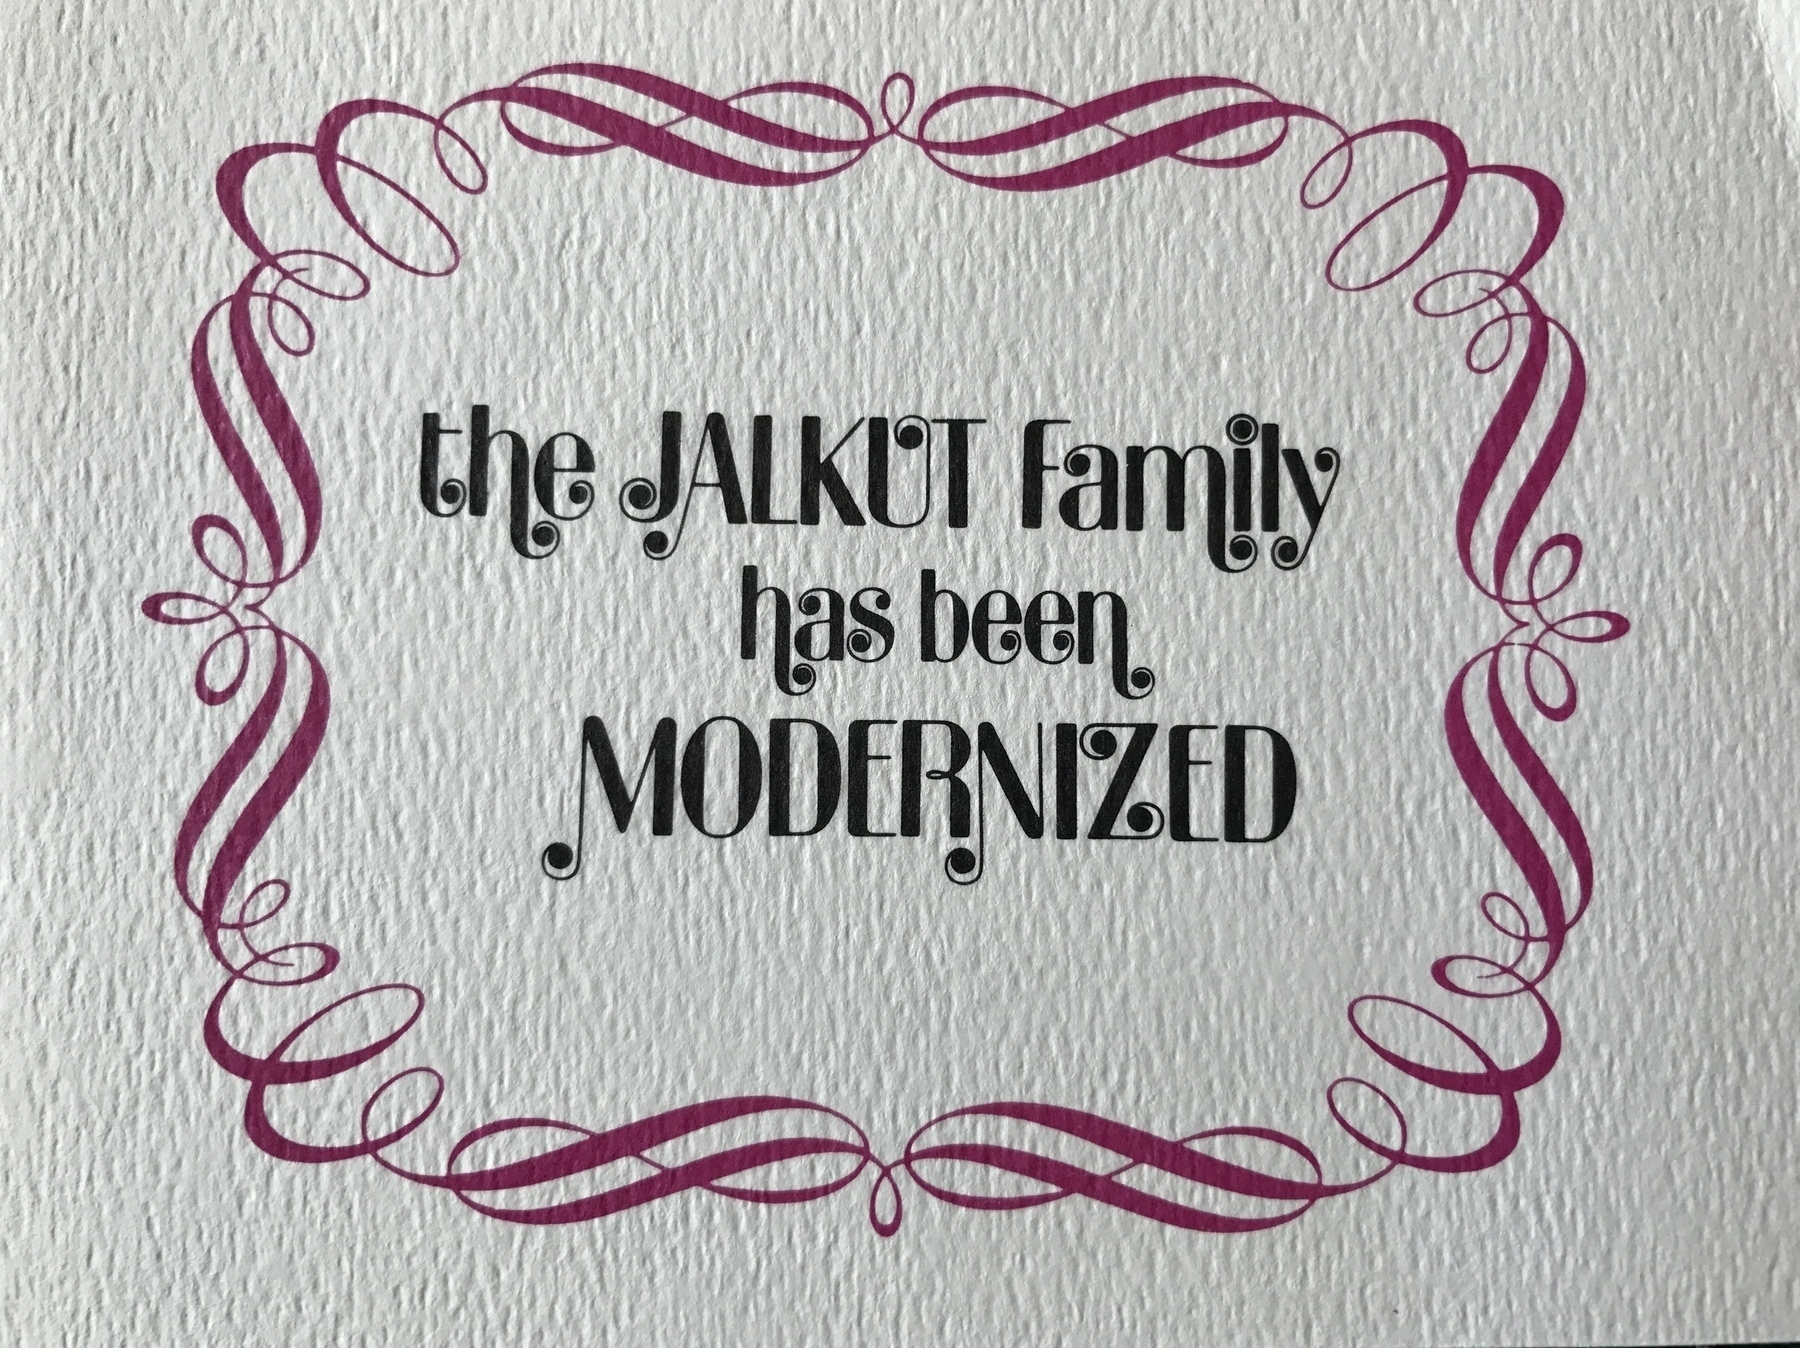 Holiday card on paper with decorative art around the words "The Jalkut Family has been MODERNIZED"